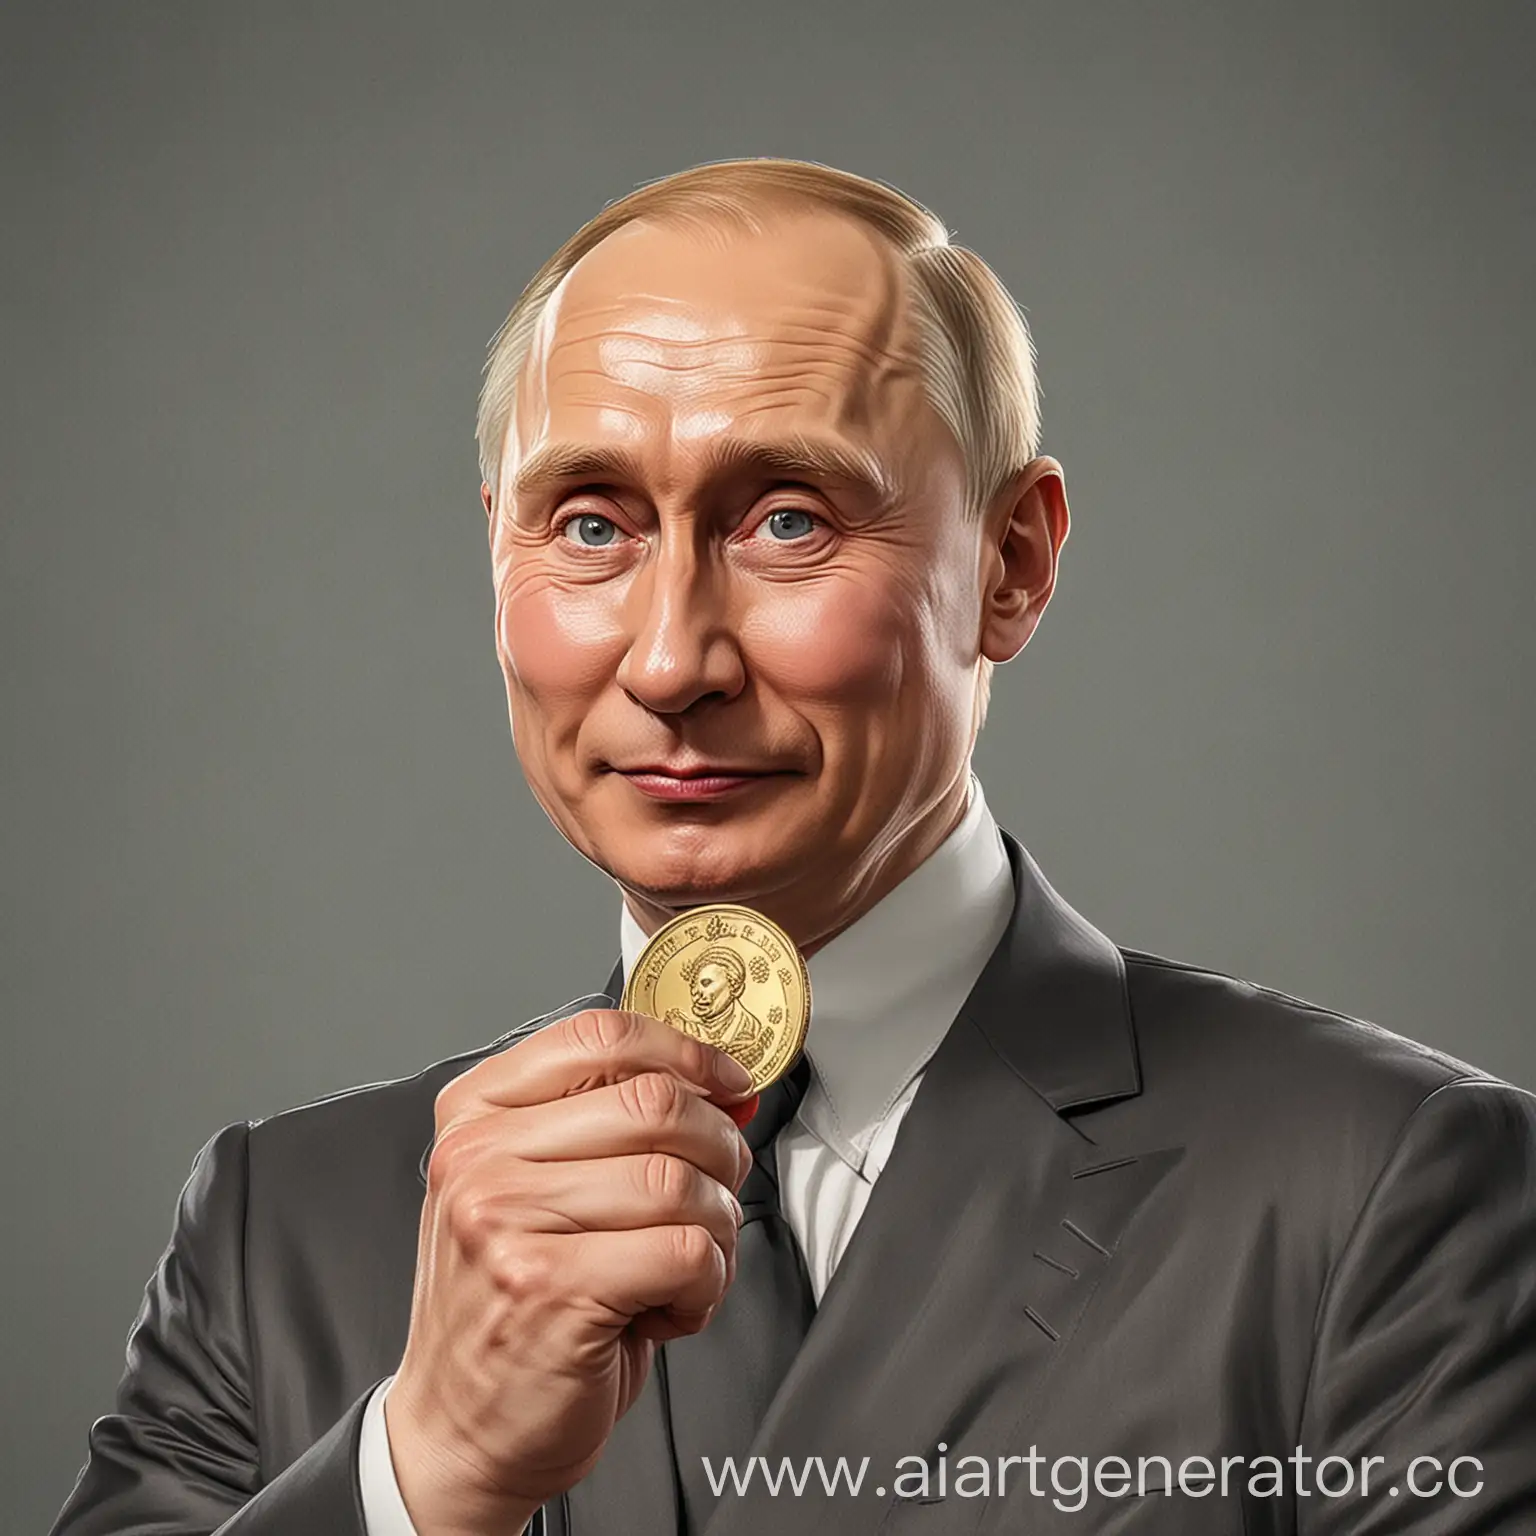 Humorous-Putin-Holding-Coin-Playful-Illustration-of-Putin-with-Coin